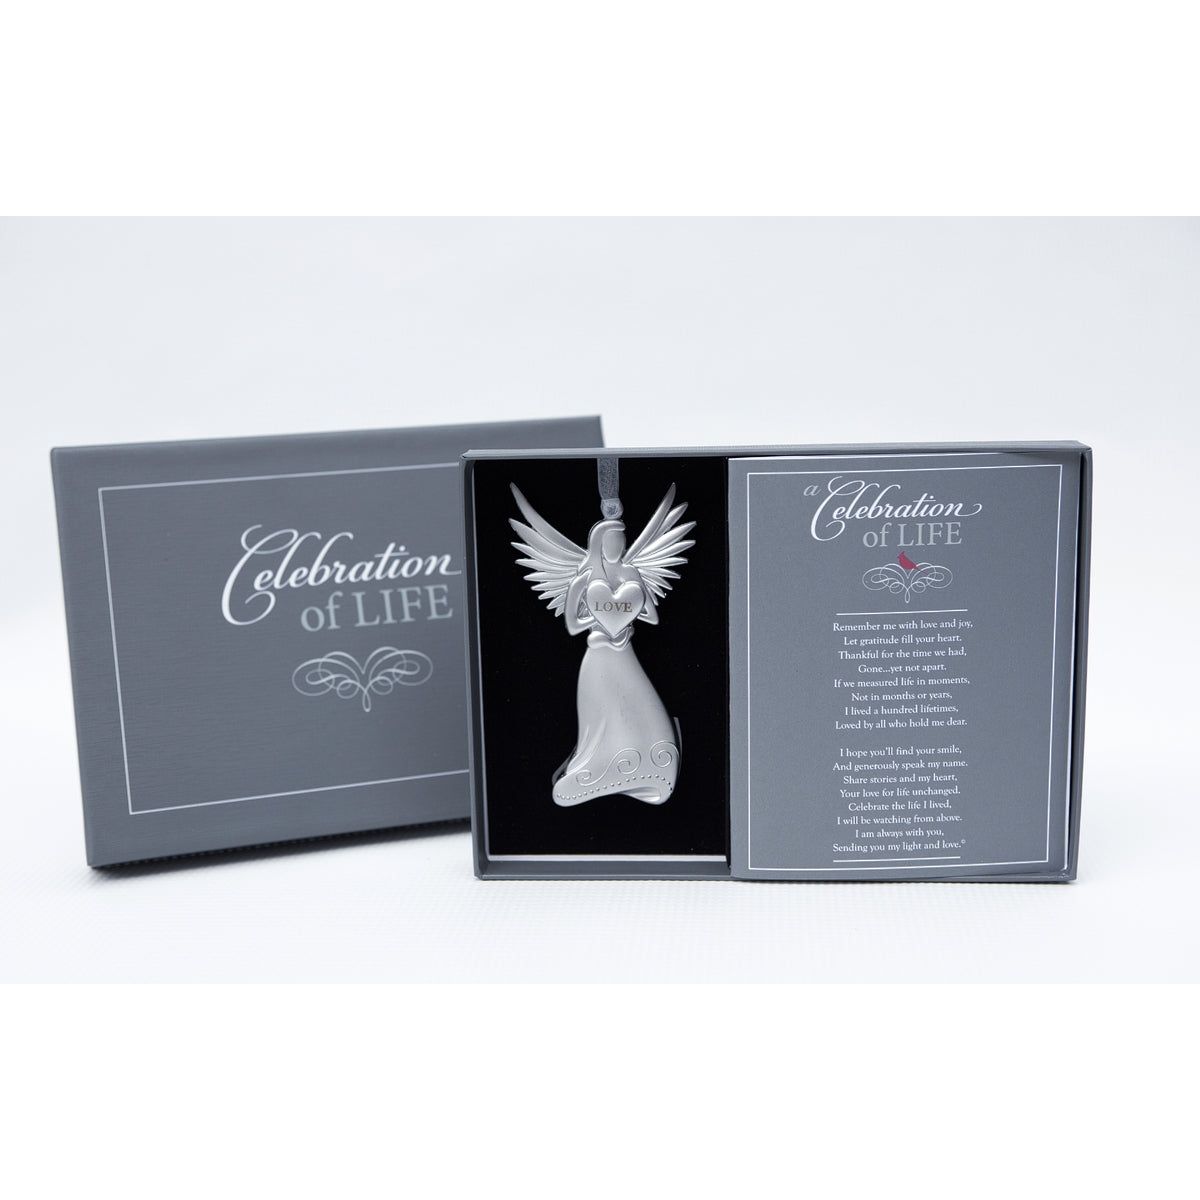 4" metal Love angel ornament beautifully packaged with "Celebration of Life" poem card in a gray linen box